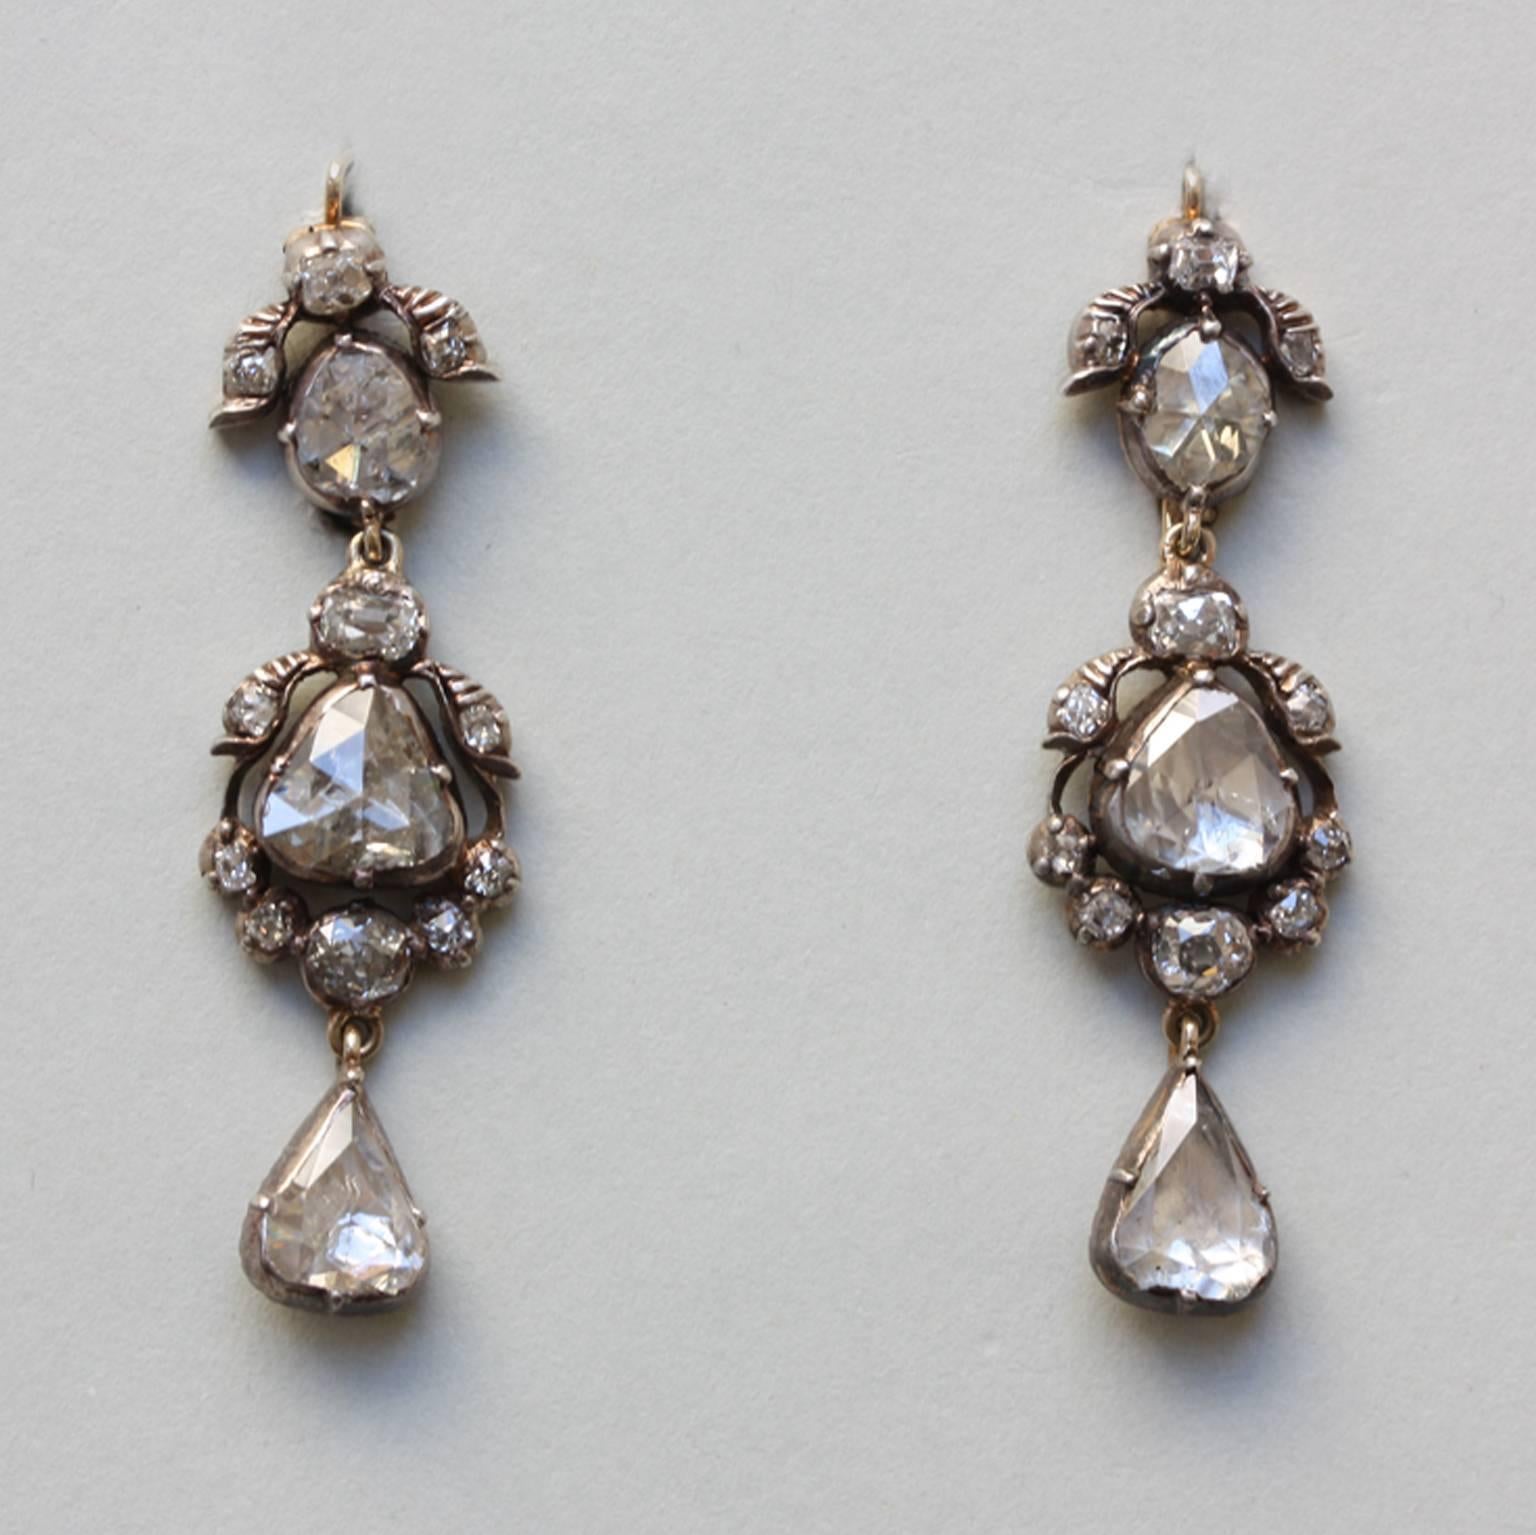 A pair of silver and gold earrings set with rose cut and cushion cut diamonds, gold hooks and gold backing, Dutch or German, 19th century.

weight: 7.08 grams
dimensions: 4.5 x 1.3 cm